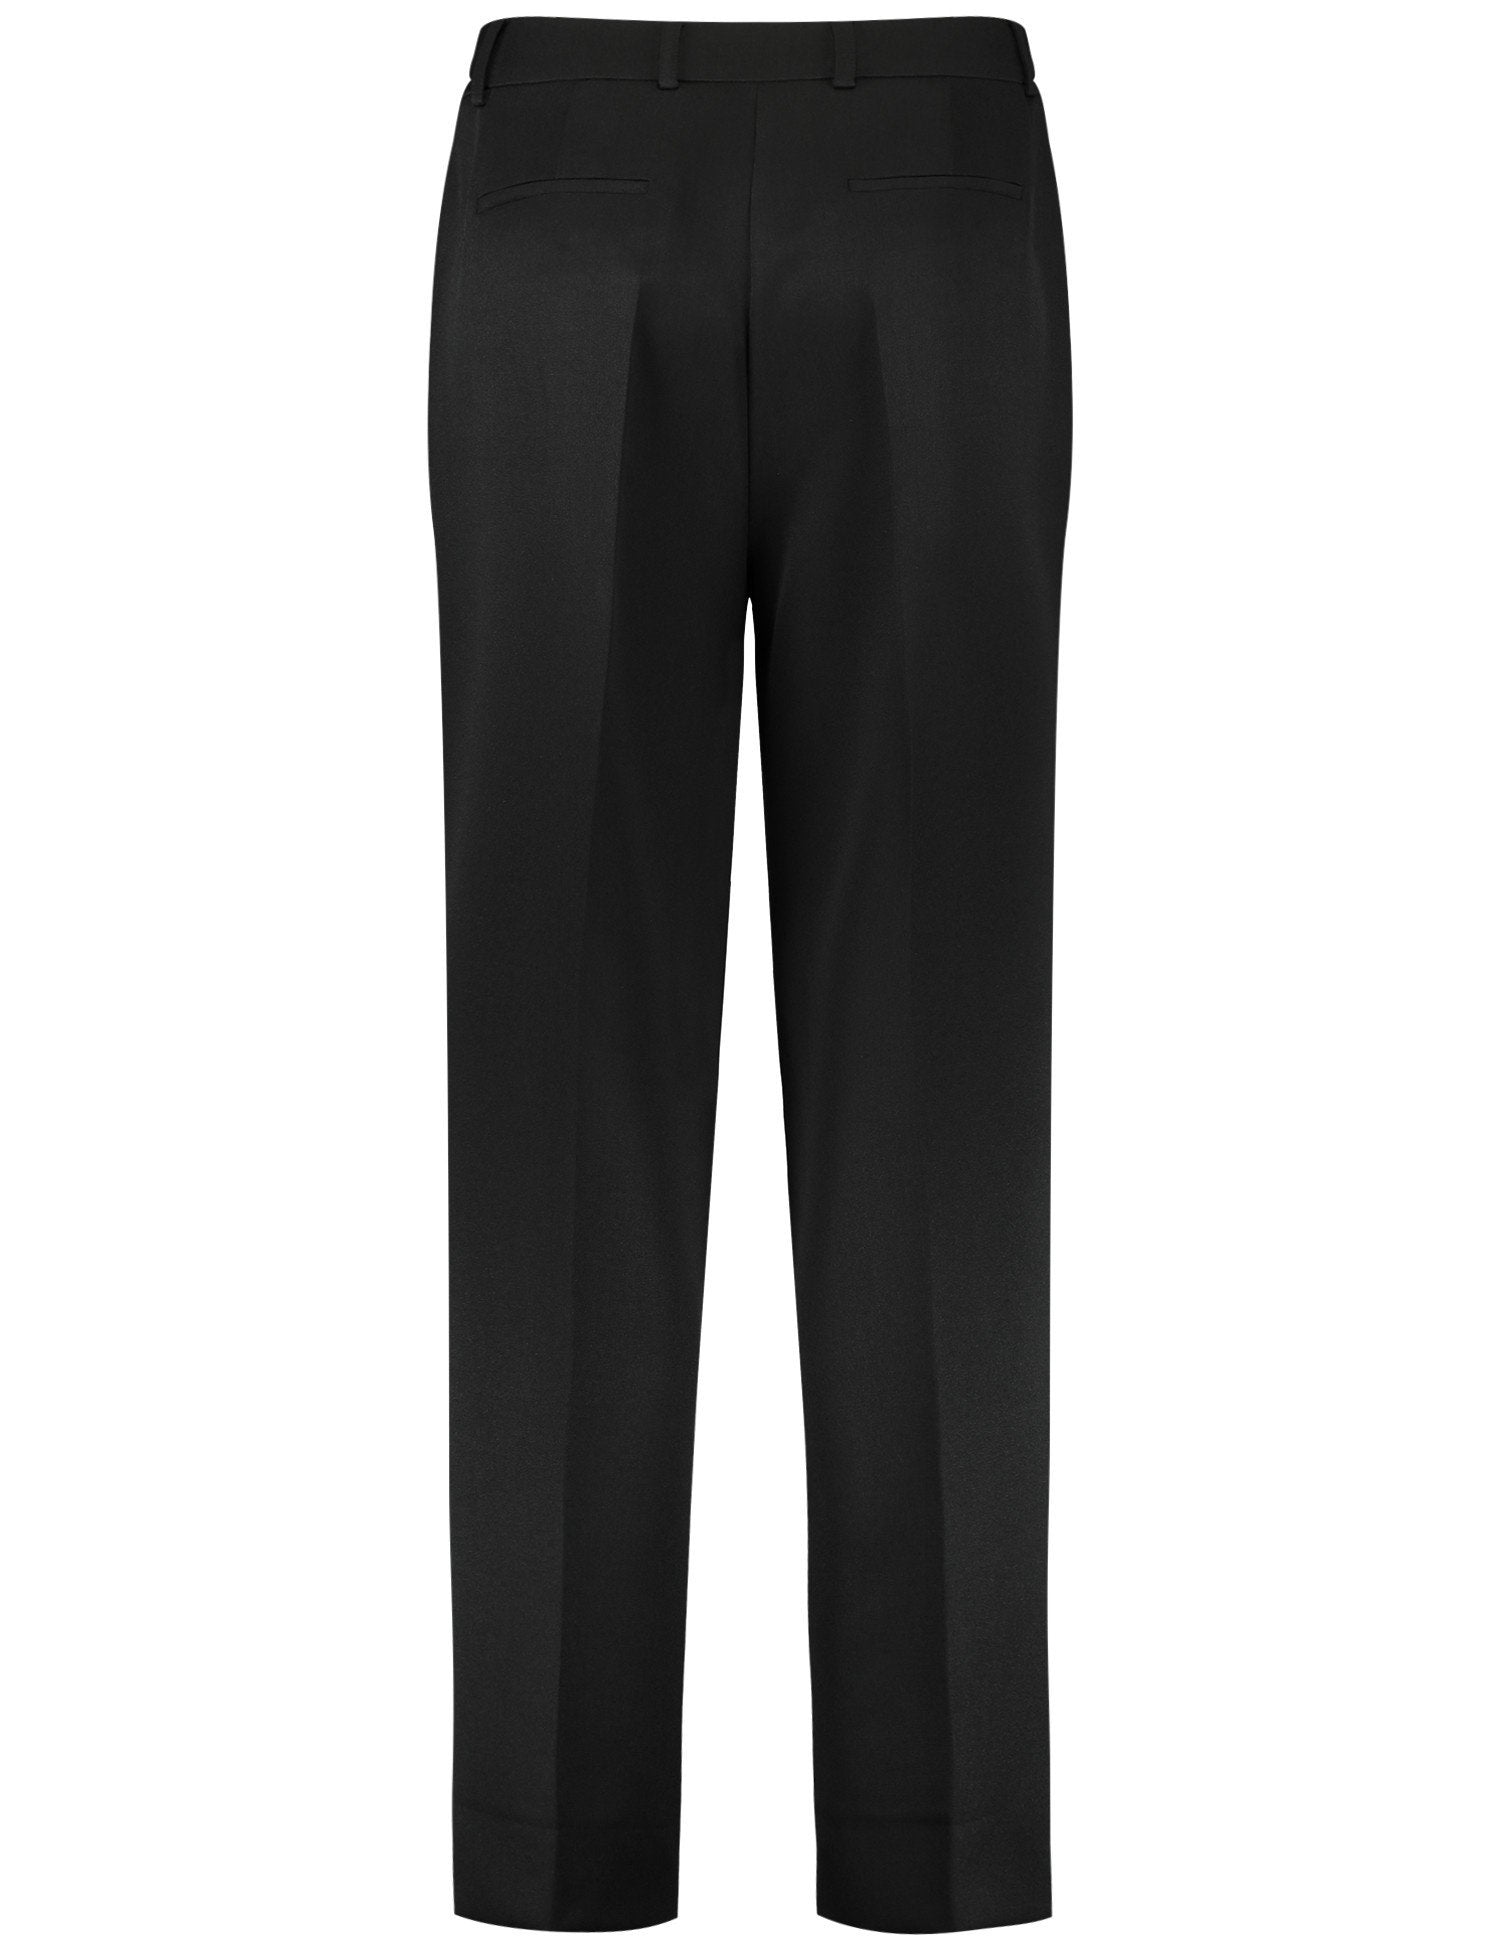 Trousers With A Wide Leg_420412-11253_1100_03